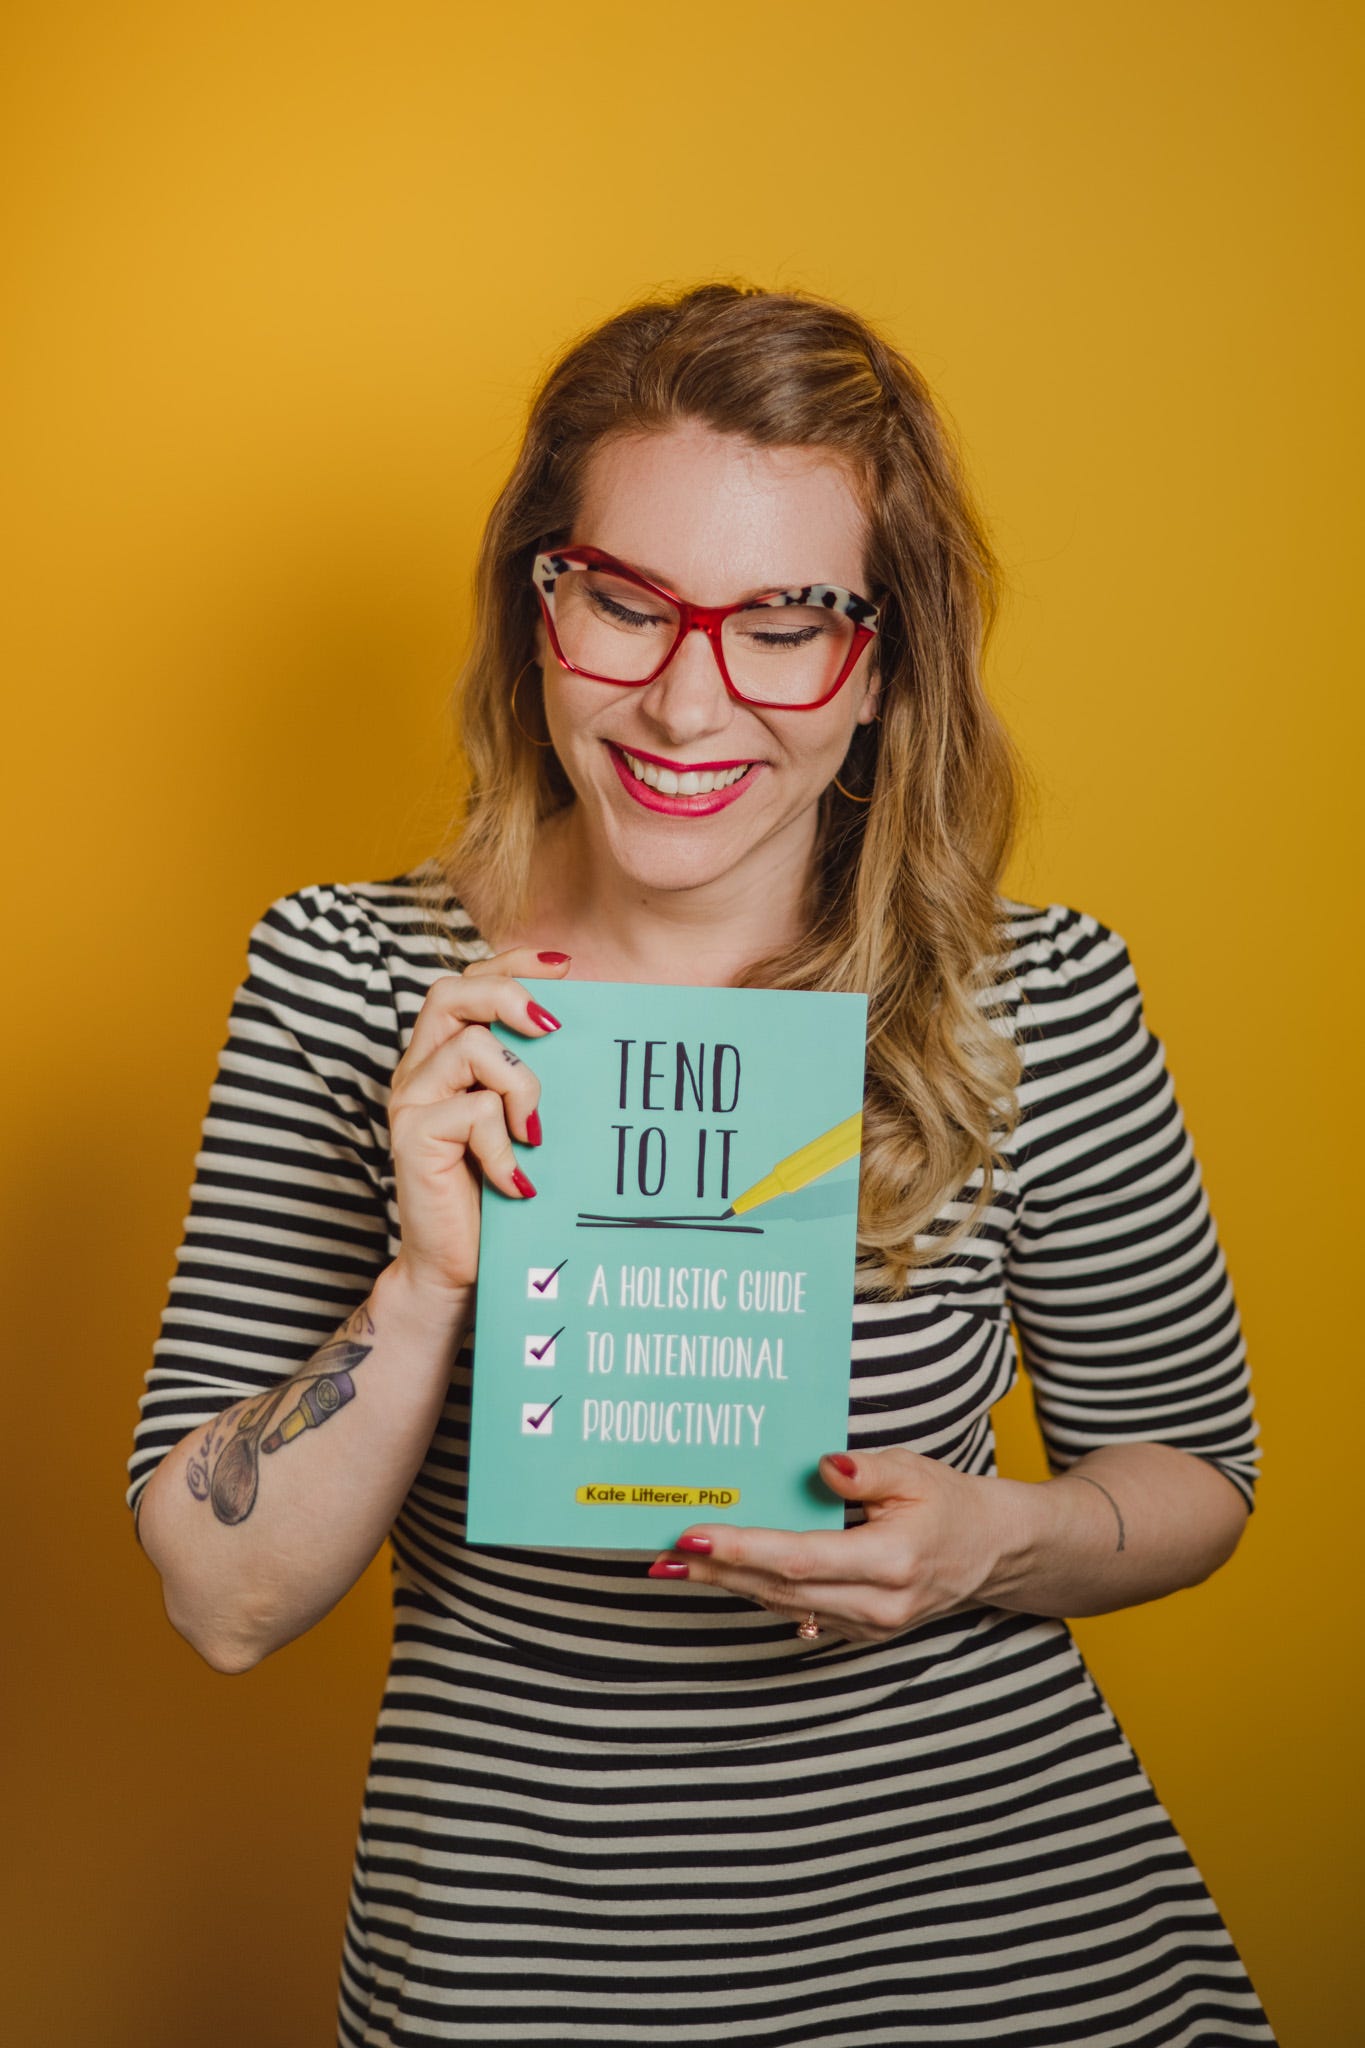 Kate holding her book Tend to It: A Holistic Guide to Intentional Productivity.